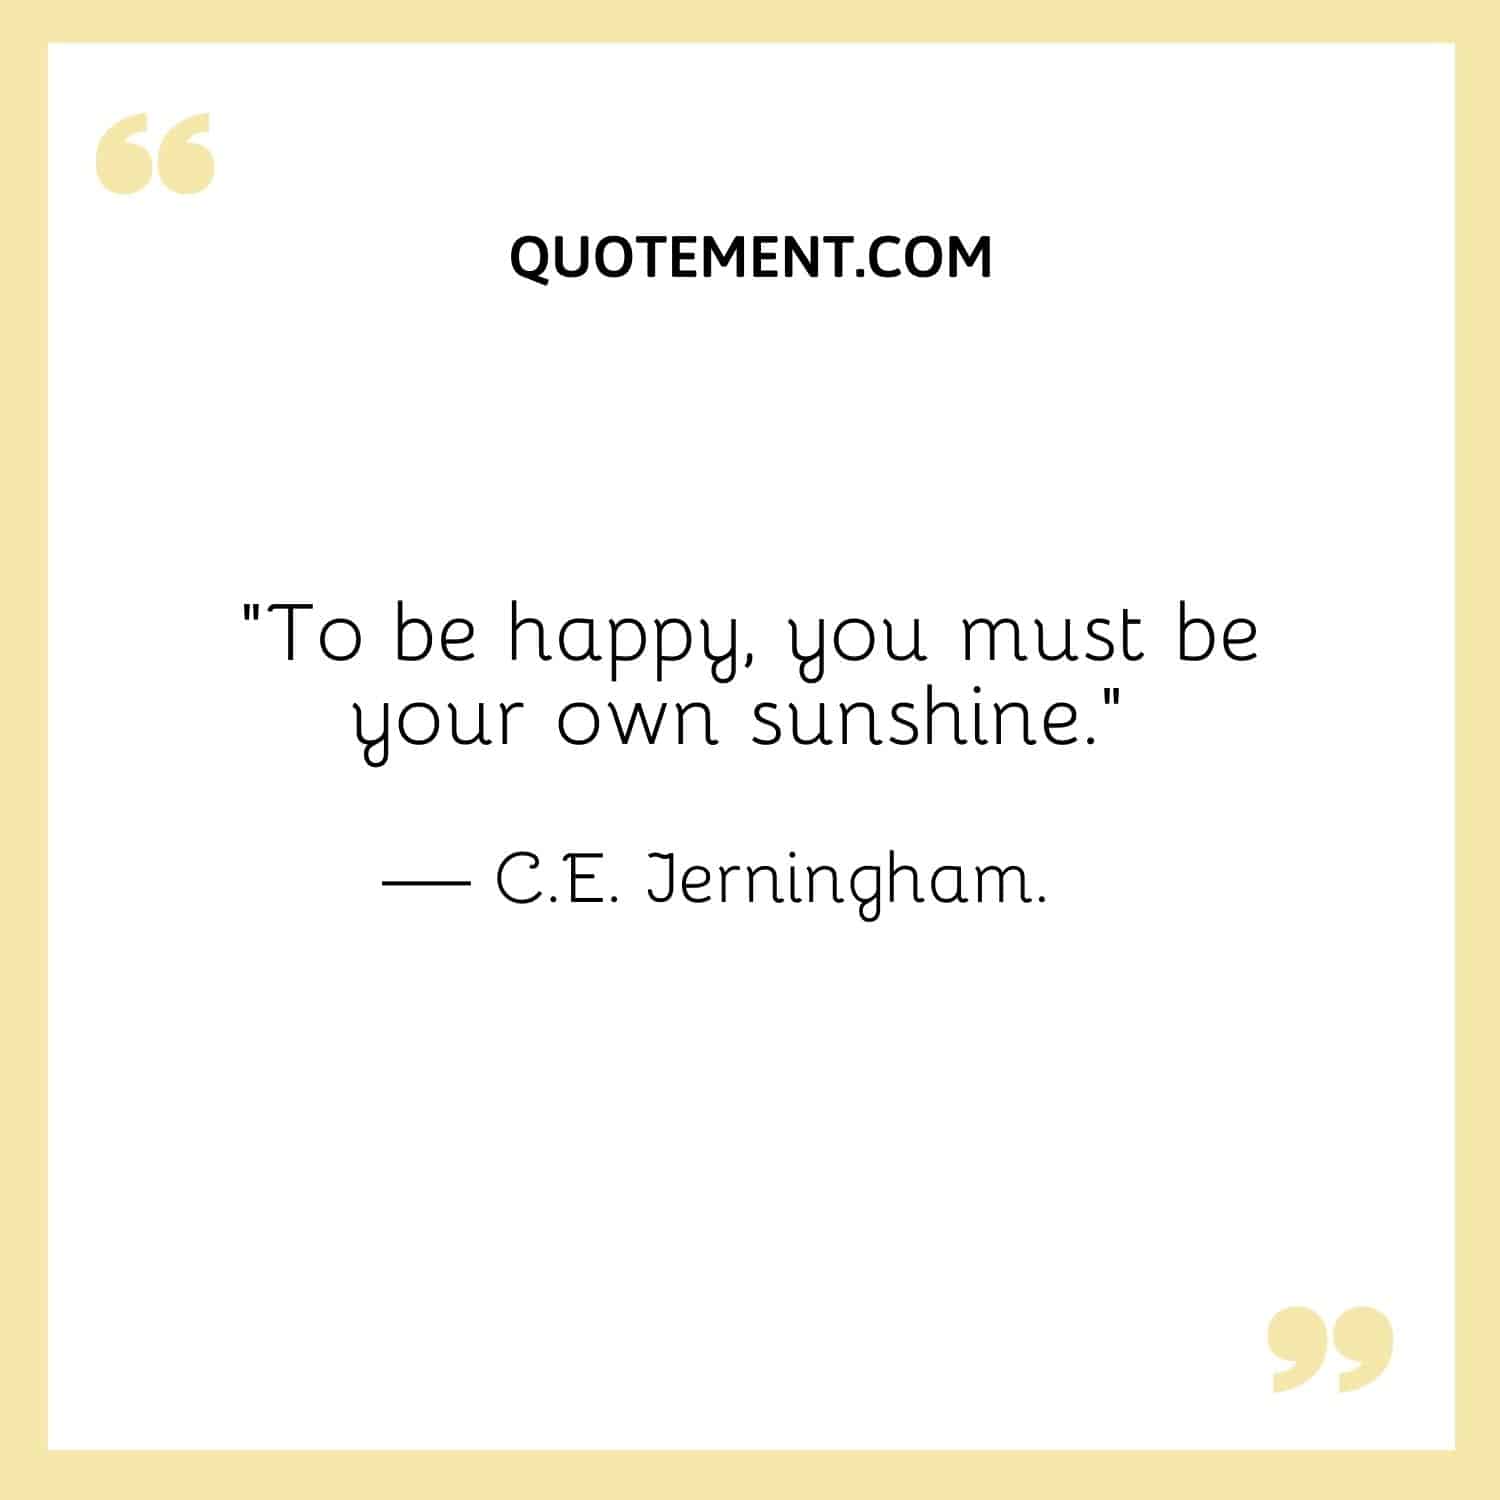 To be happy, you must be your own sunshine